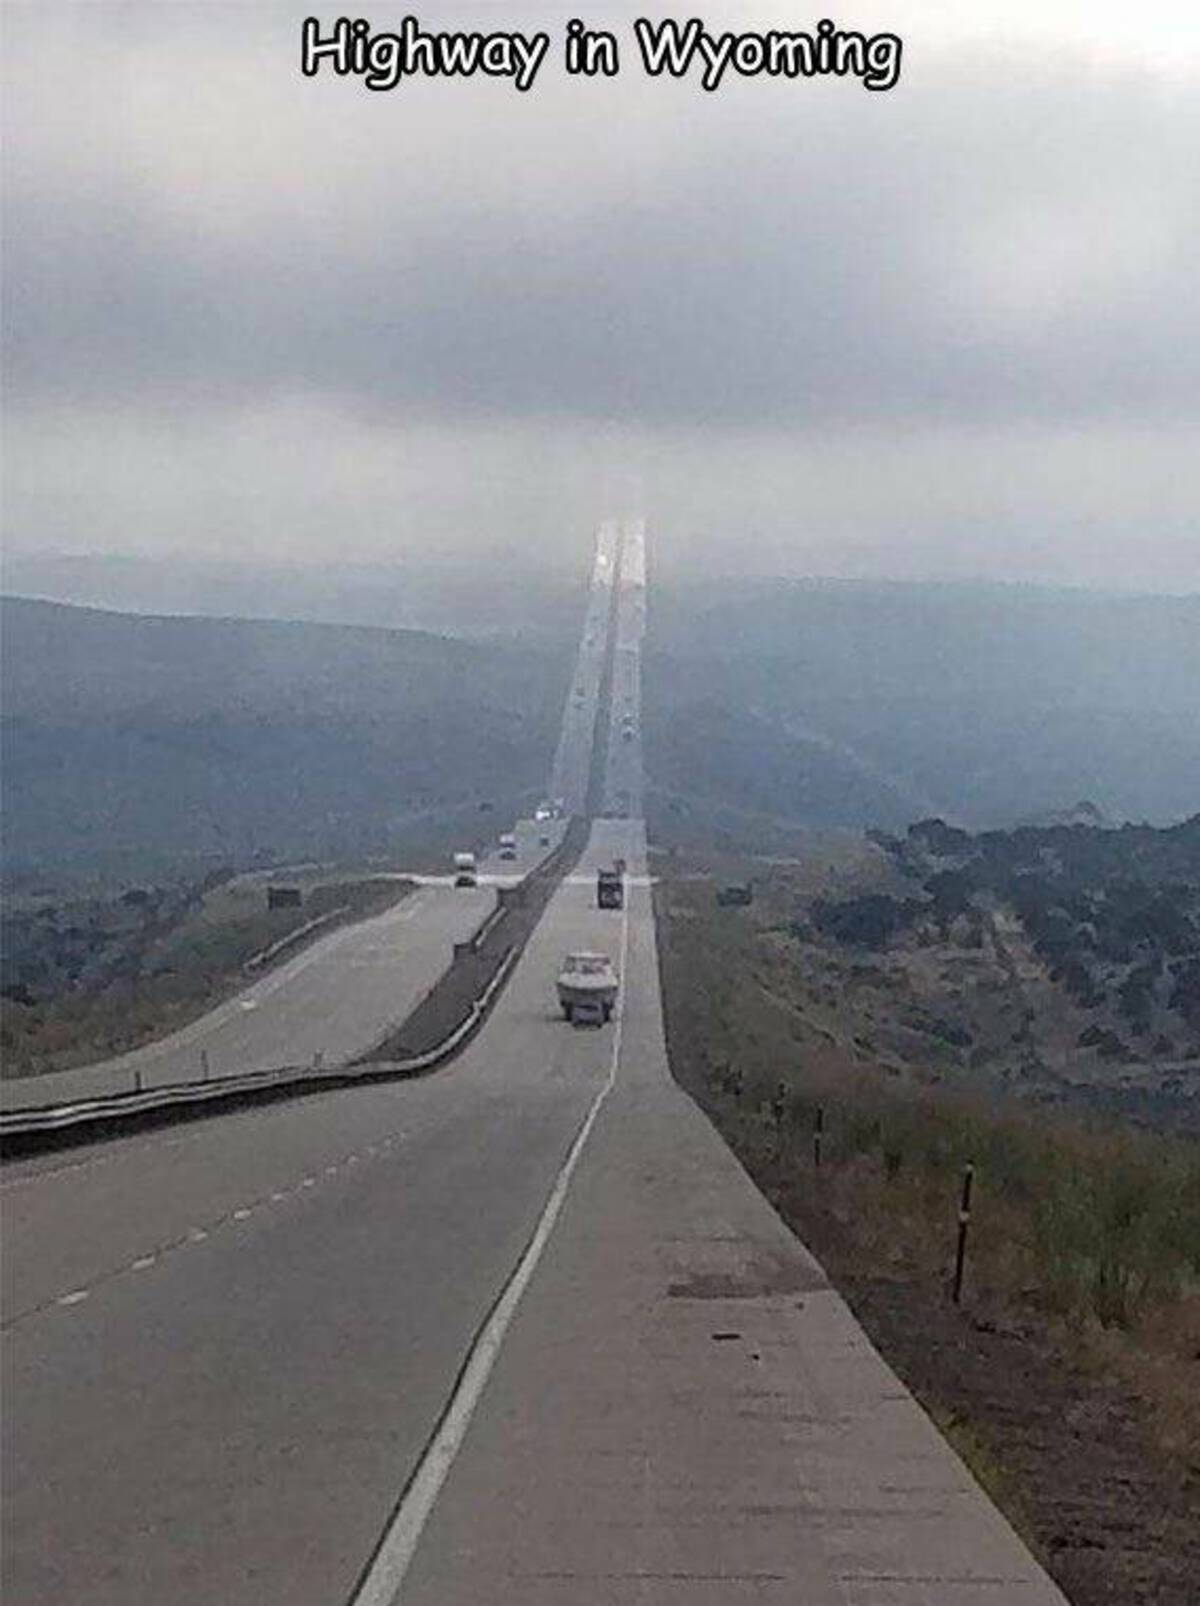 fixed link - Highway in Wyoming